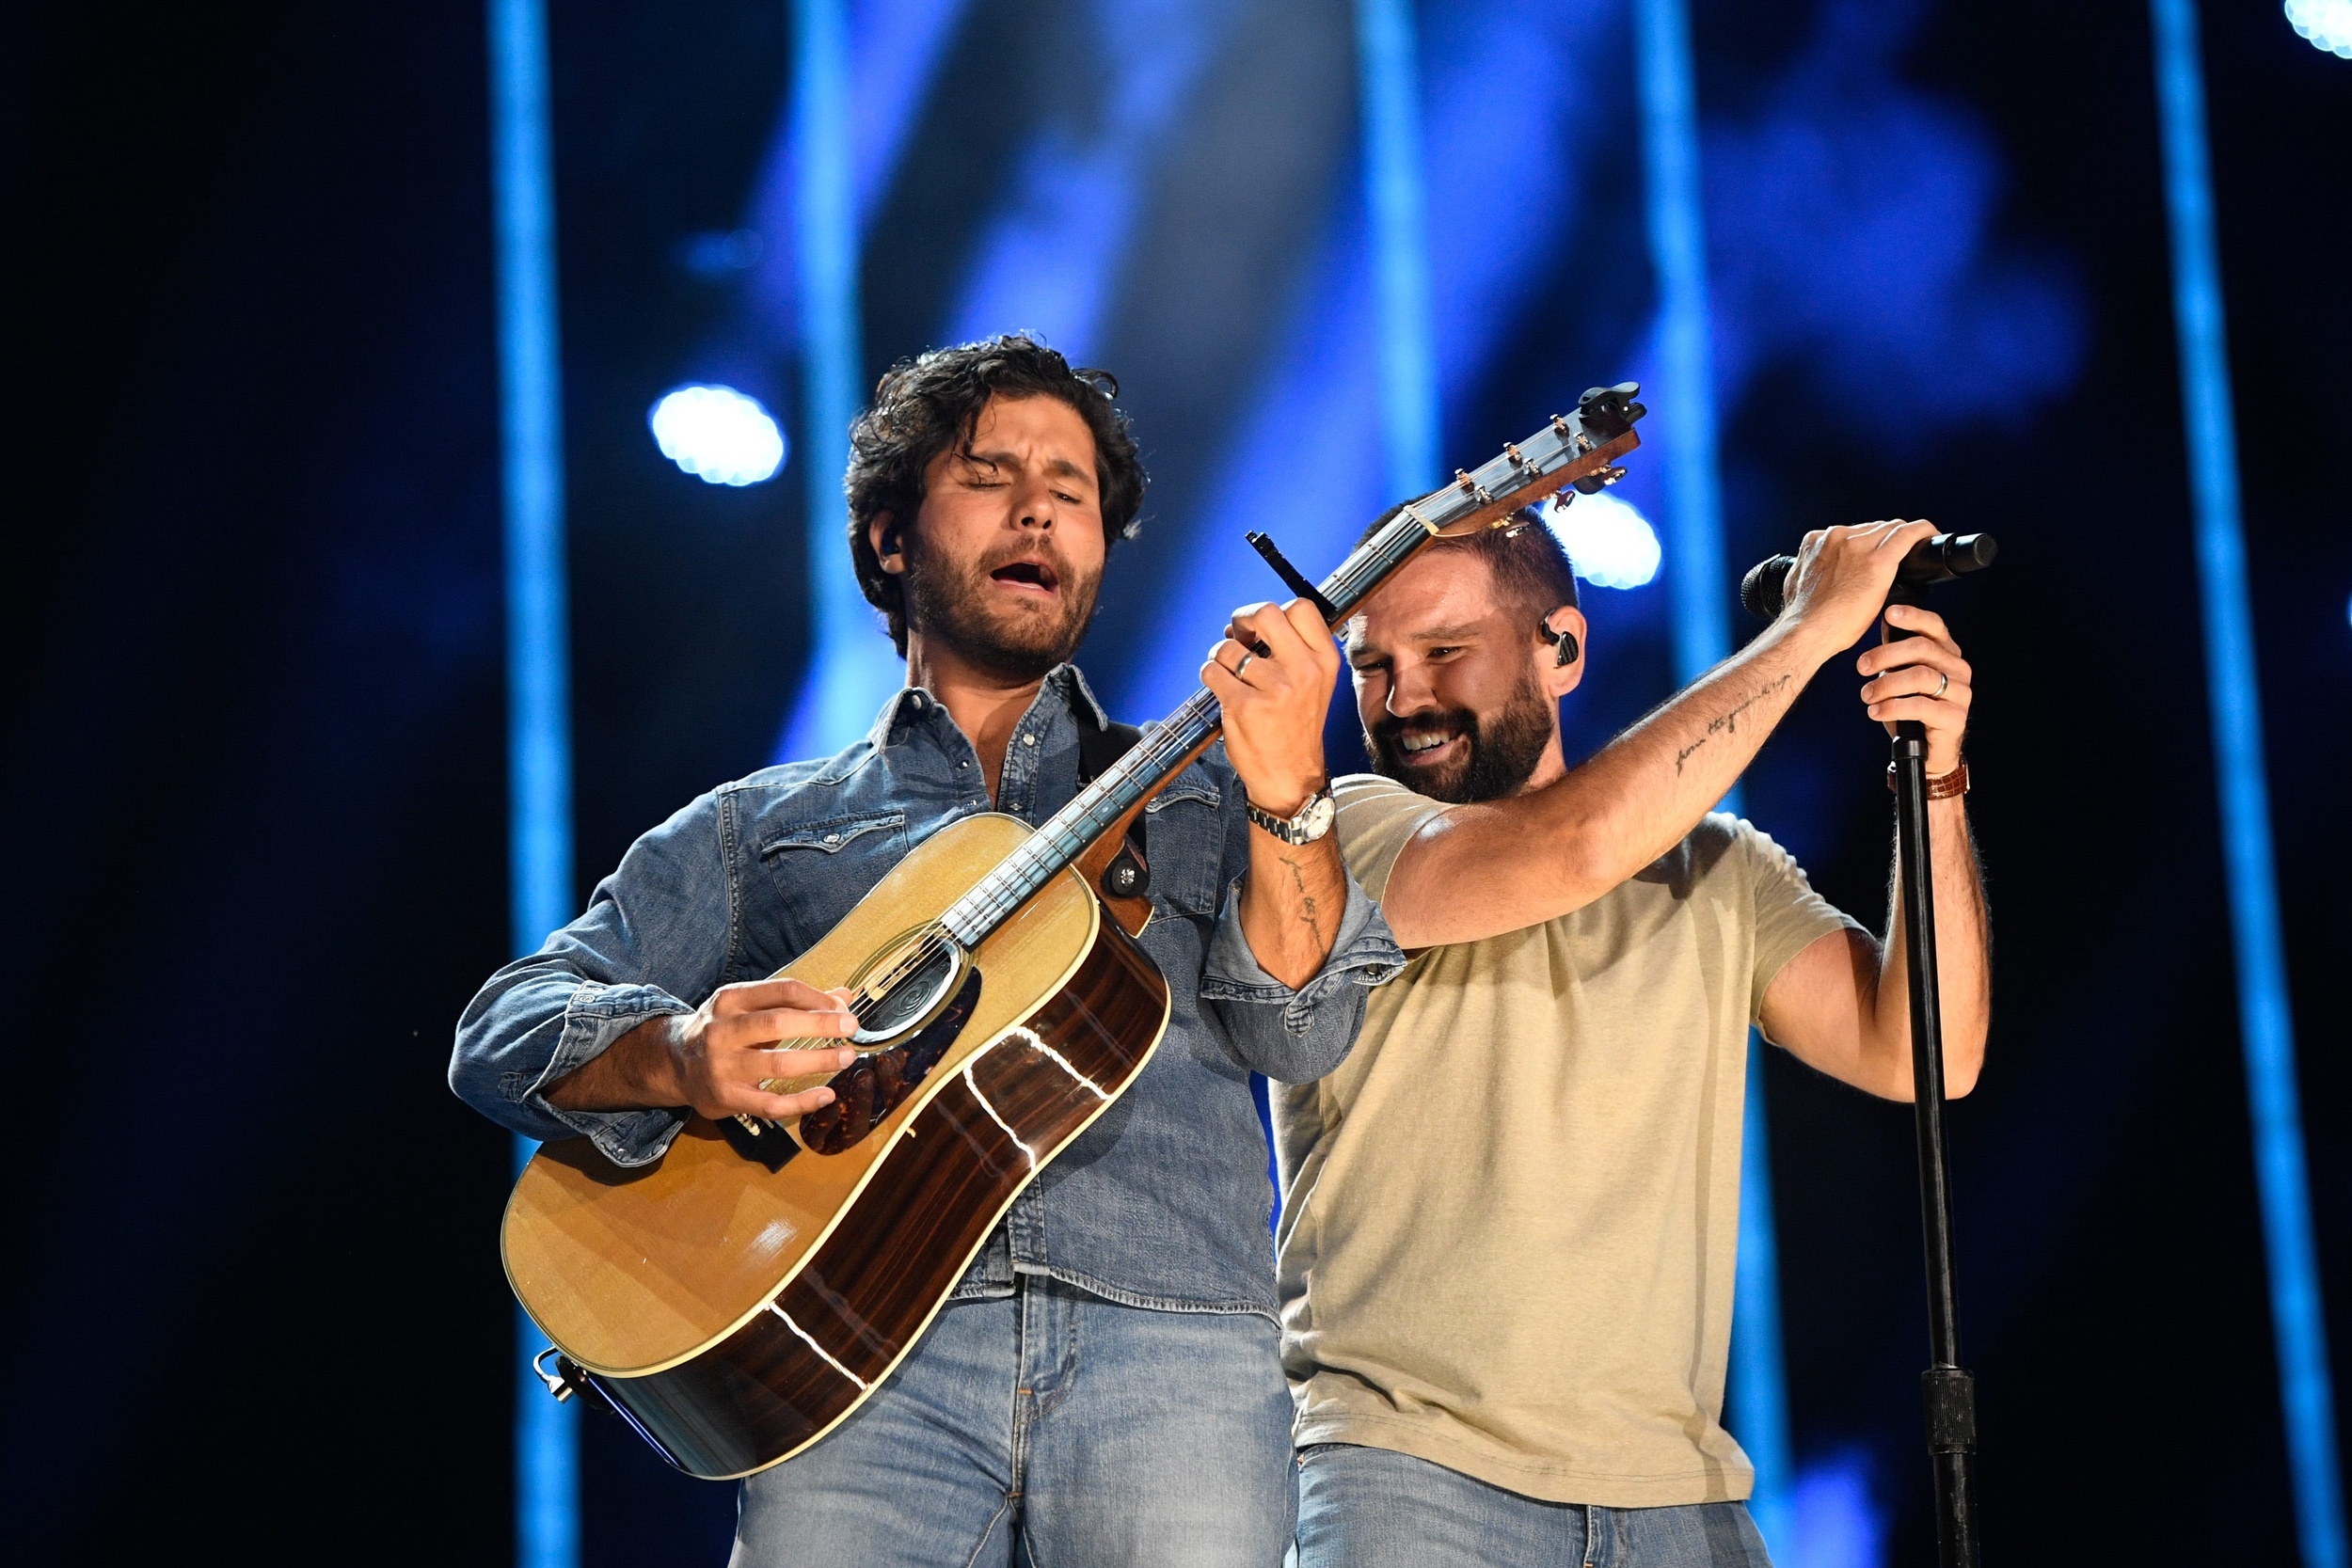 <p>This three-time Grammy Award-winning country-rock duo takes to the road for a 19-city tour that supports 2023's <a href="https://www.youtube.com/watch?v=LRSpeDrB53o"><em>Bigger Houses</em>. </a>While the bloom might be somewhat have come off the Dan + Shay rose in turns of overwhelming country popularity, this is still one solid live act to see. Known for their high-energy sets, the boys deliver the goods every time out, and this year should be no different. The fun begins Feb. 29 in Greenville, S.C., and ends in Boston on April 13.</p><p>You may also like: <a href='https://www.yardbarker.com/entertainment/articles/the_worst_american_remakes_of_foreign_films_033124/s1__31311536'>The worst American remakes of foreign films</a></p>